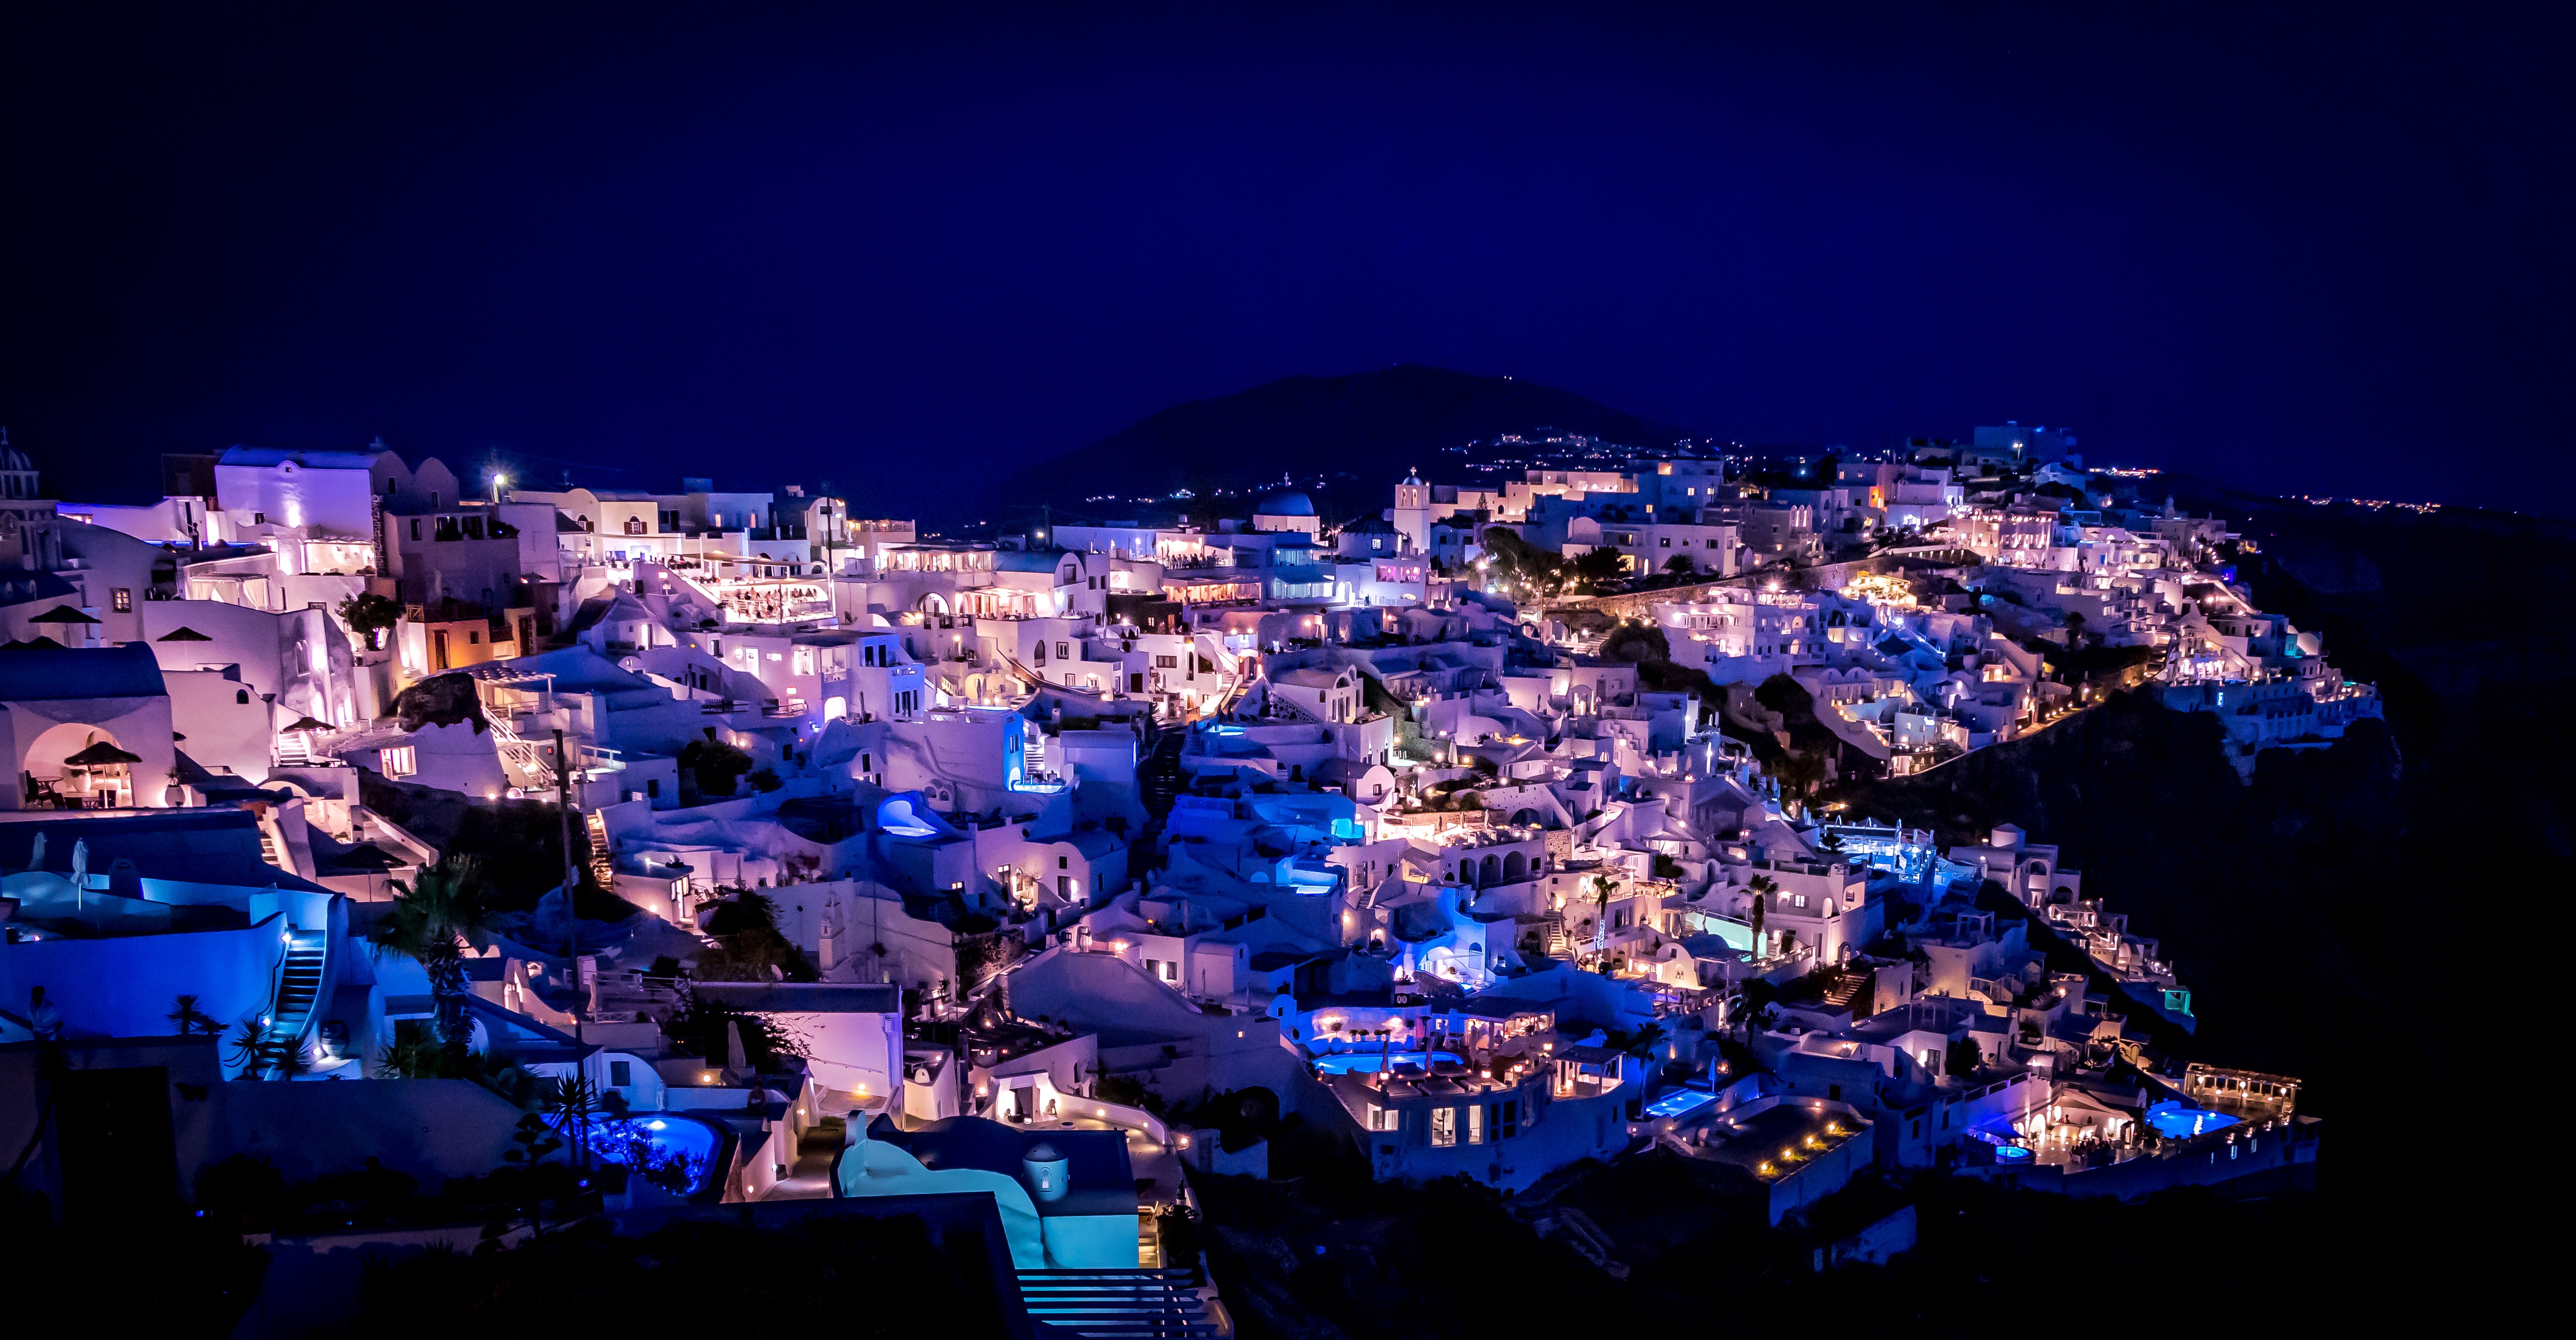 136440 download wallpaper cities, night city, illumination, lighting, greece, santorini screensavers and pictures for free